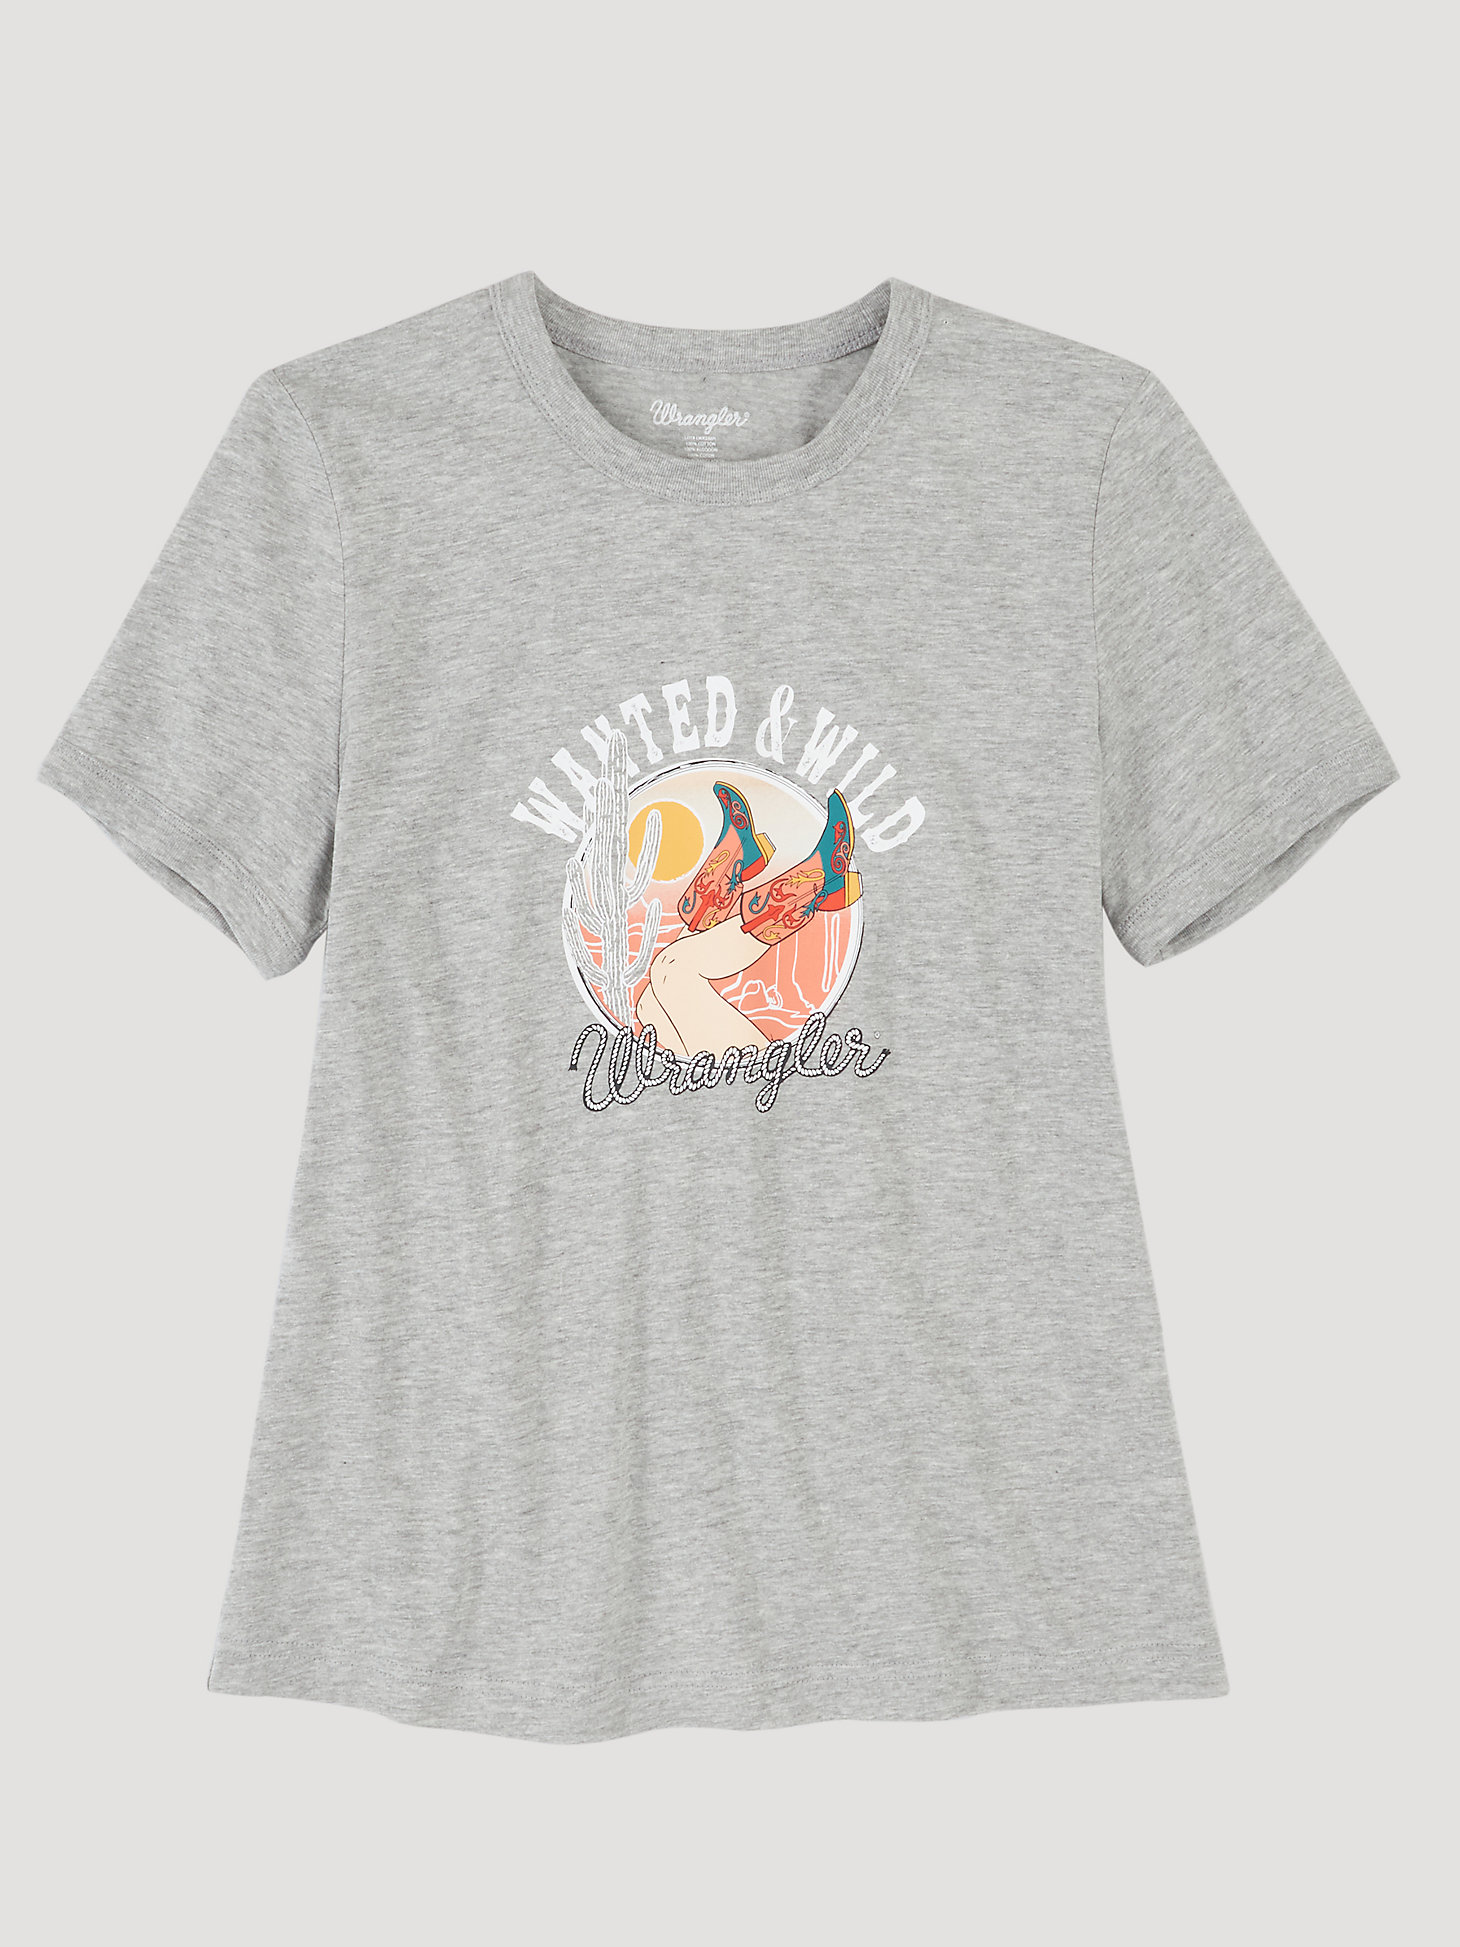 Women's Wanted And Wild Ringer Tee in Grey alternative view 3